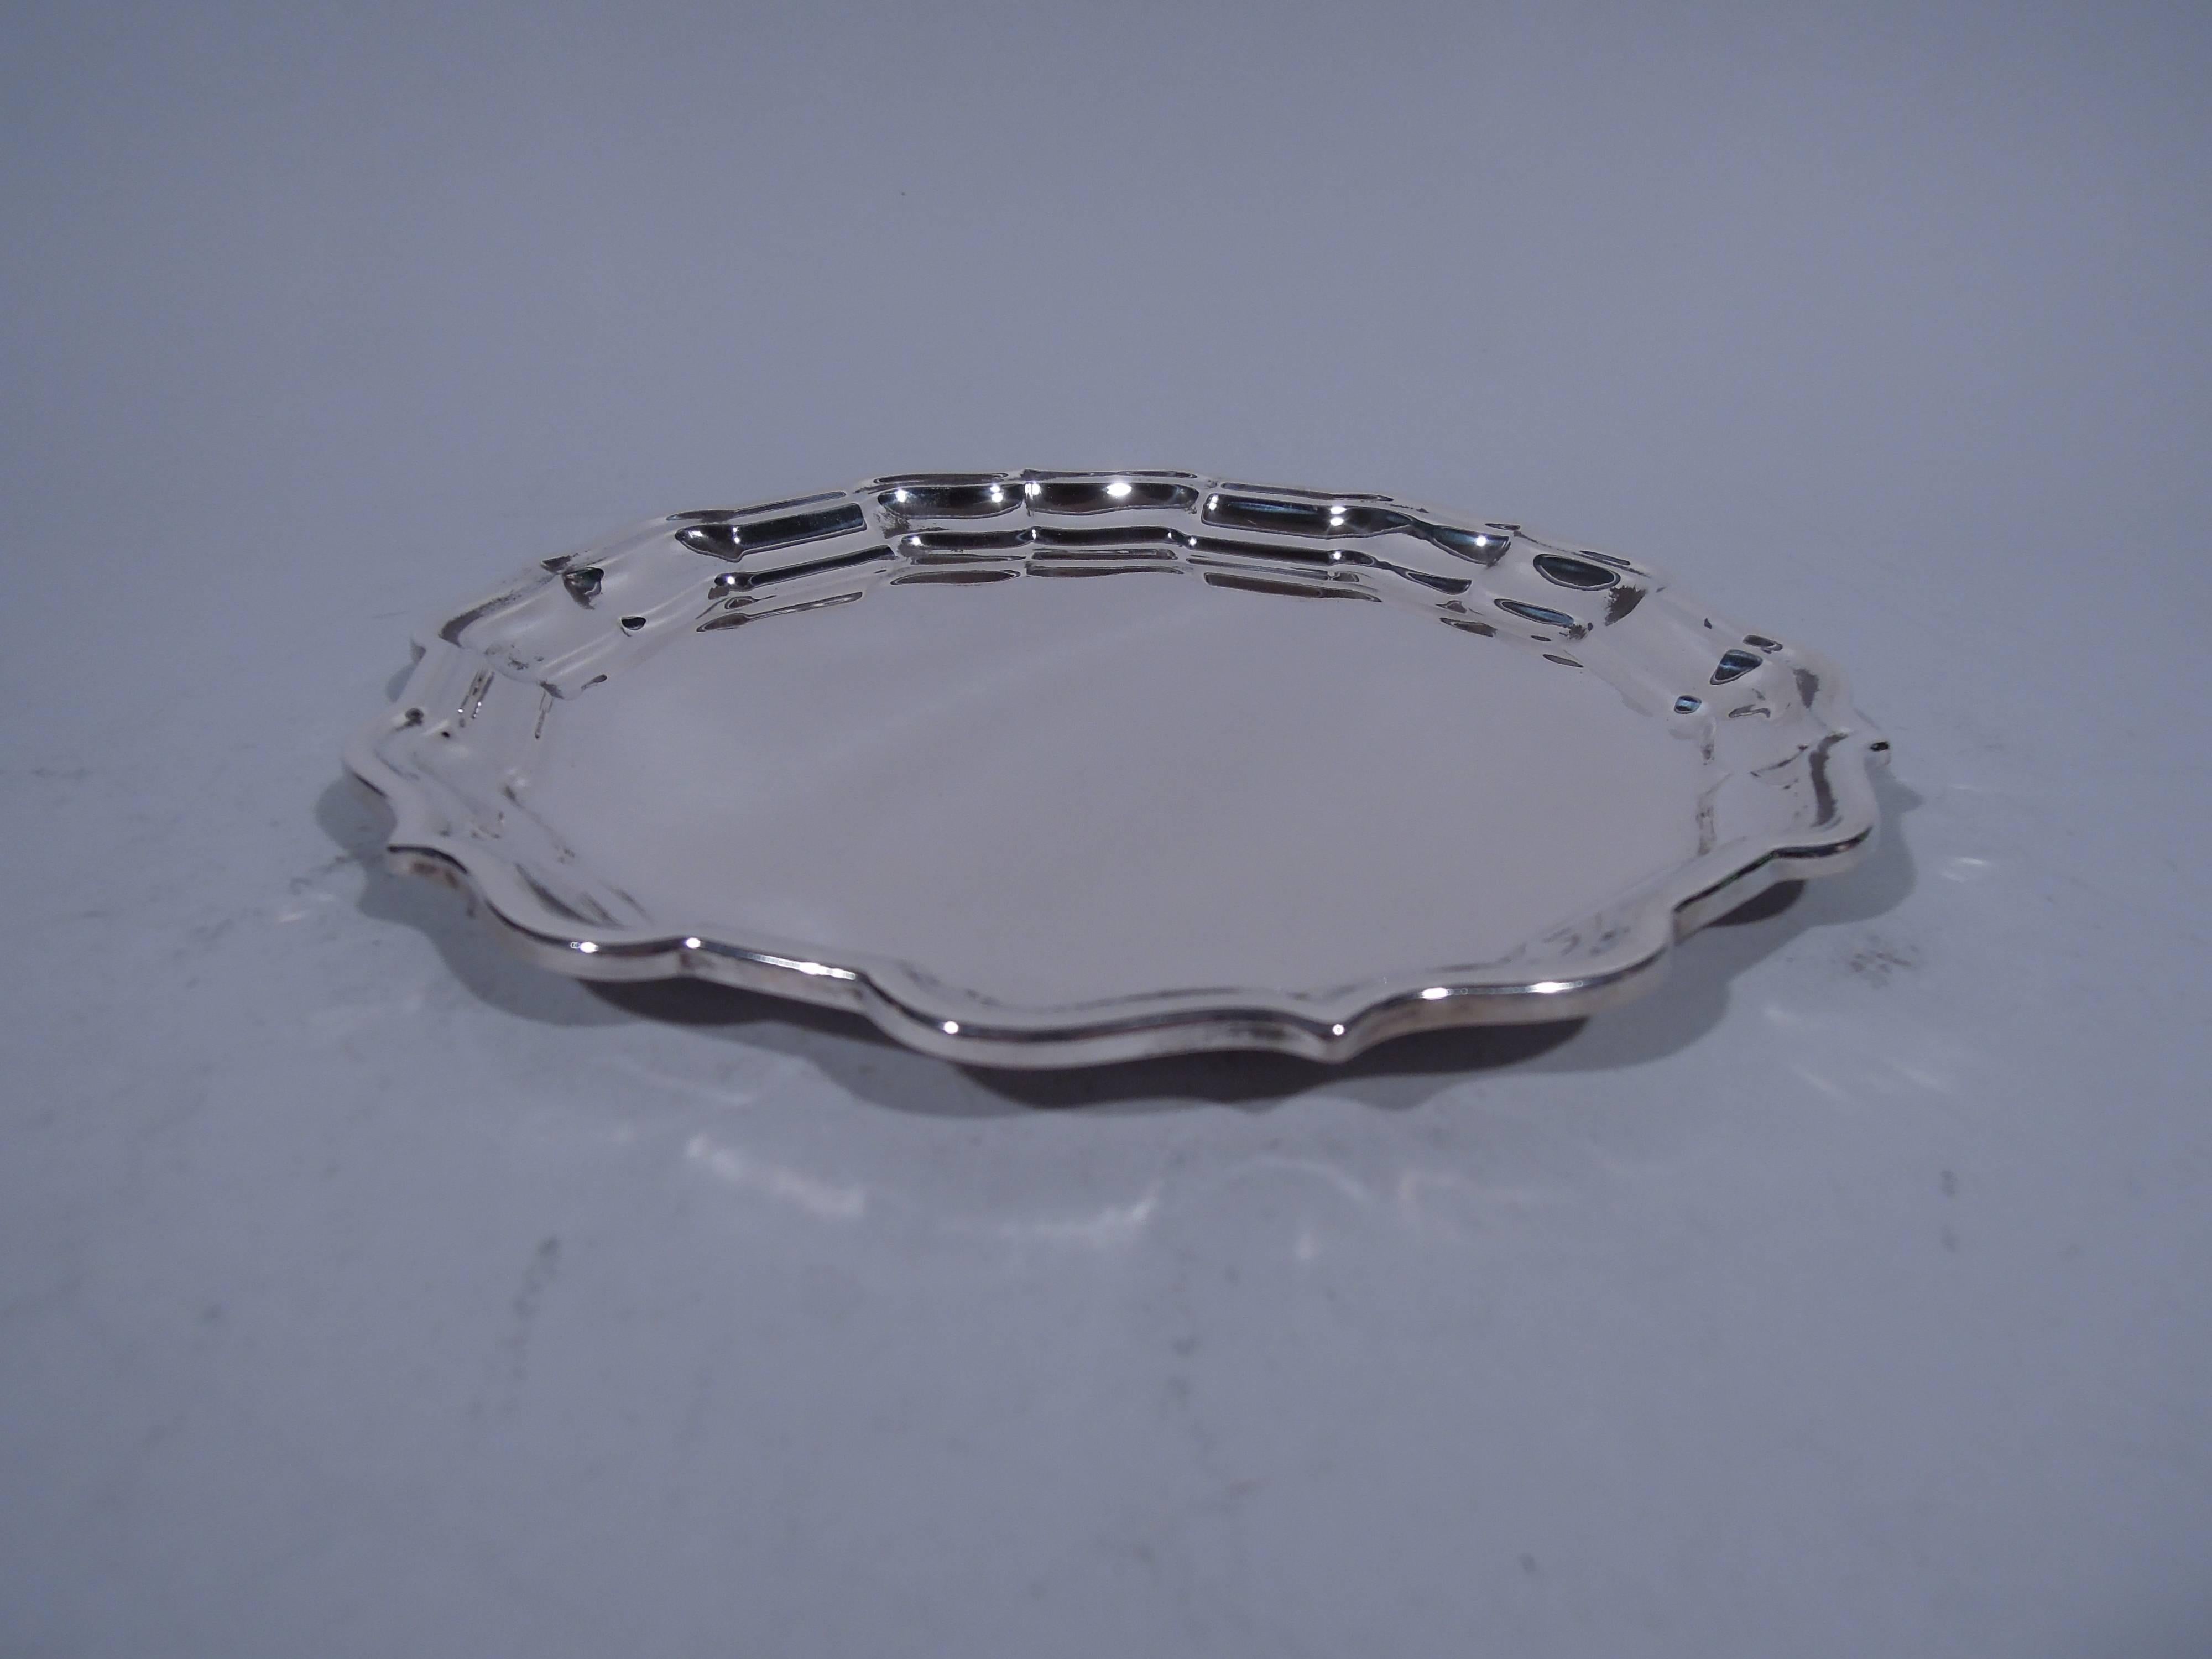 Sterling silver serving tray in Chippendale pattern. Made by Frank W Smith in Gardner, Mass., circa 1950. Circular with curved sides and curvilinear piecrust rim. A great piece in the Classic pattern. Hallmark includes pattern name and no. 378S.